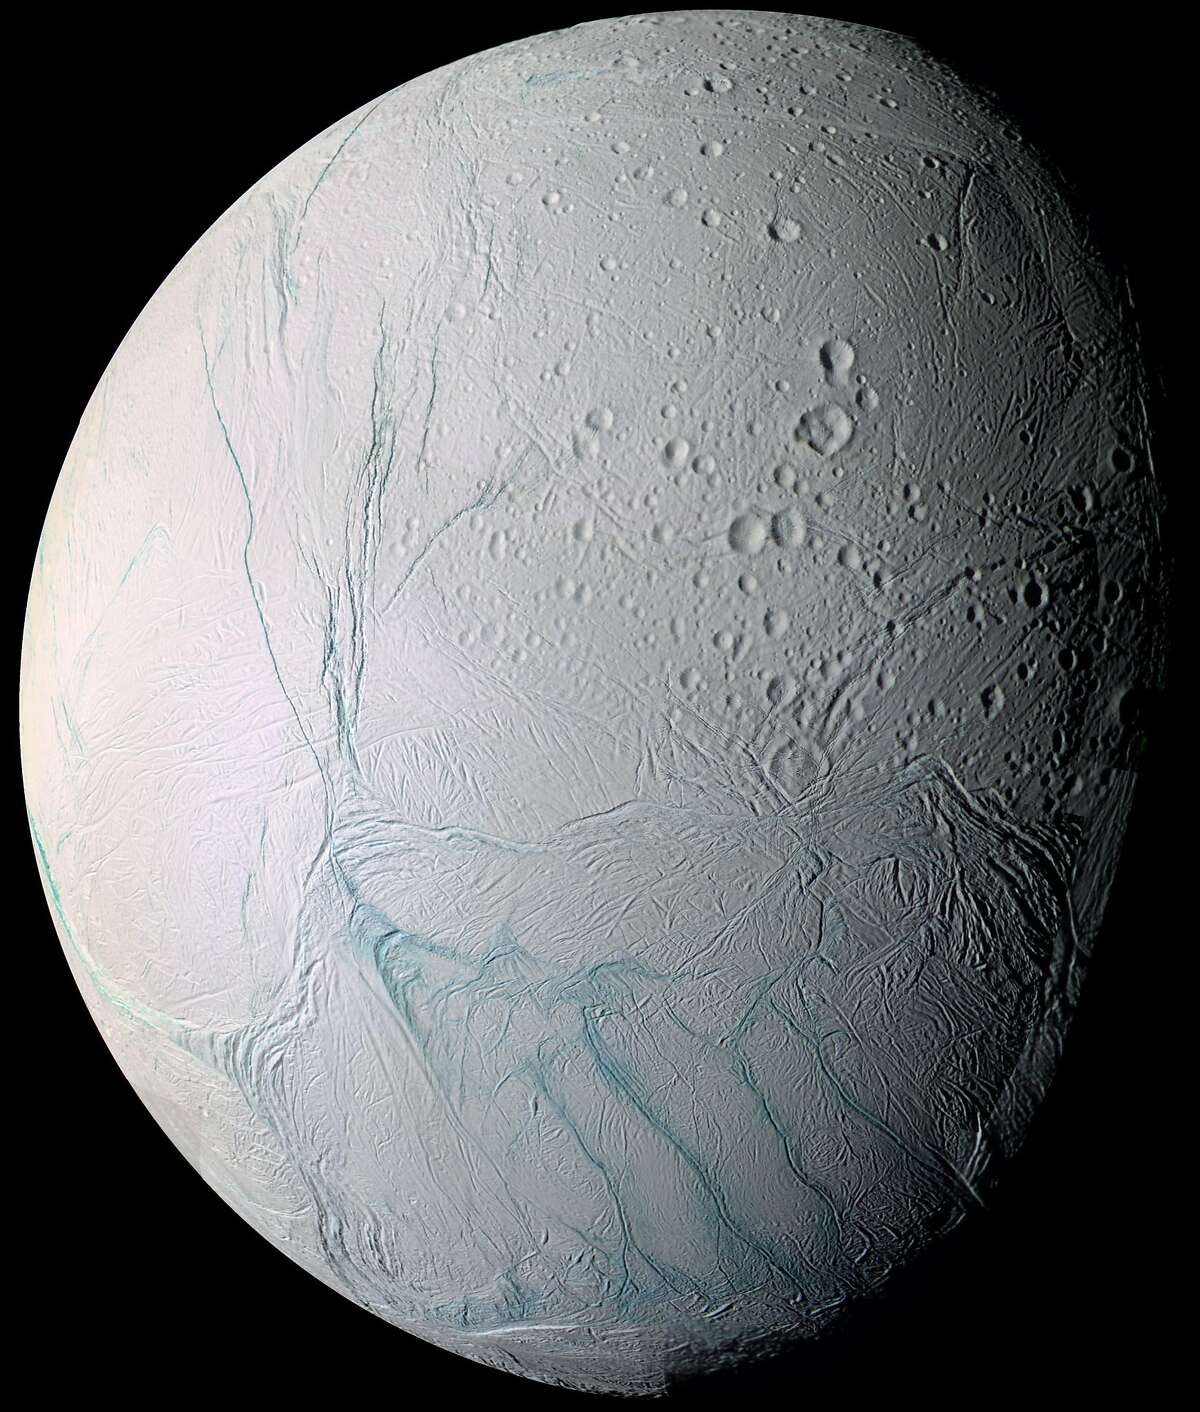 This June 28, 2009 image provided by NASA, taken by the international Cassini spacecraft, shows Enceladus, one of Saturn's moons. A new study published online Wednesday, March 11, 2015, in the journal Nature, suggests there are ongoing interactions between hot water and rocks beneath the surface of the icy moon. (AP Photo/NASA)